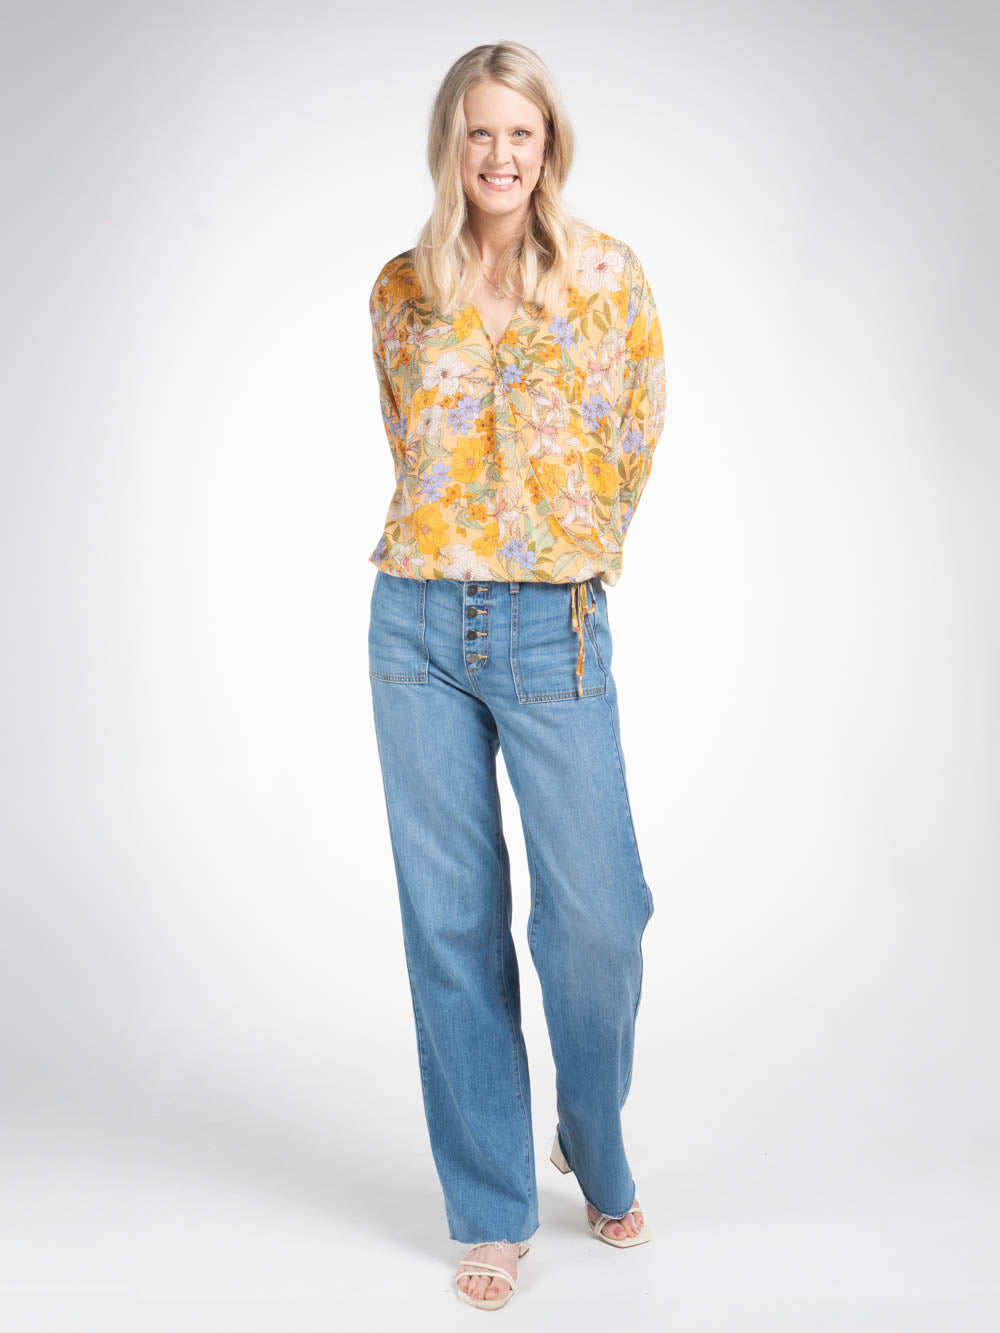 Floral Tops for Tall Women